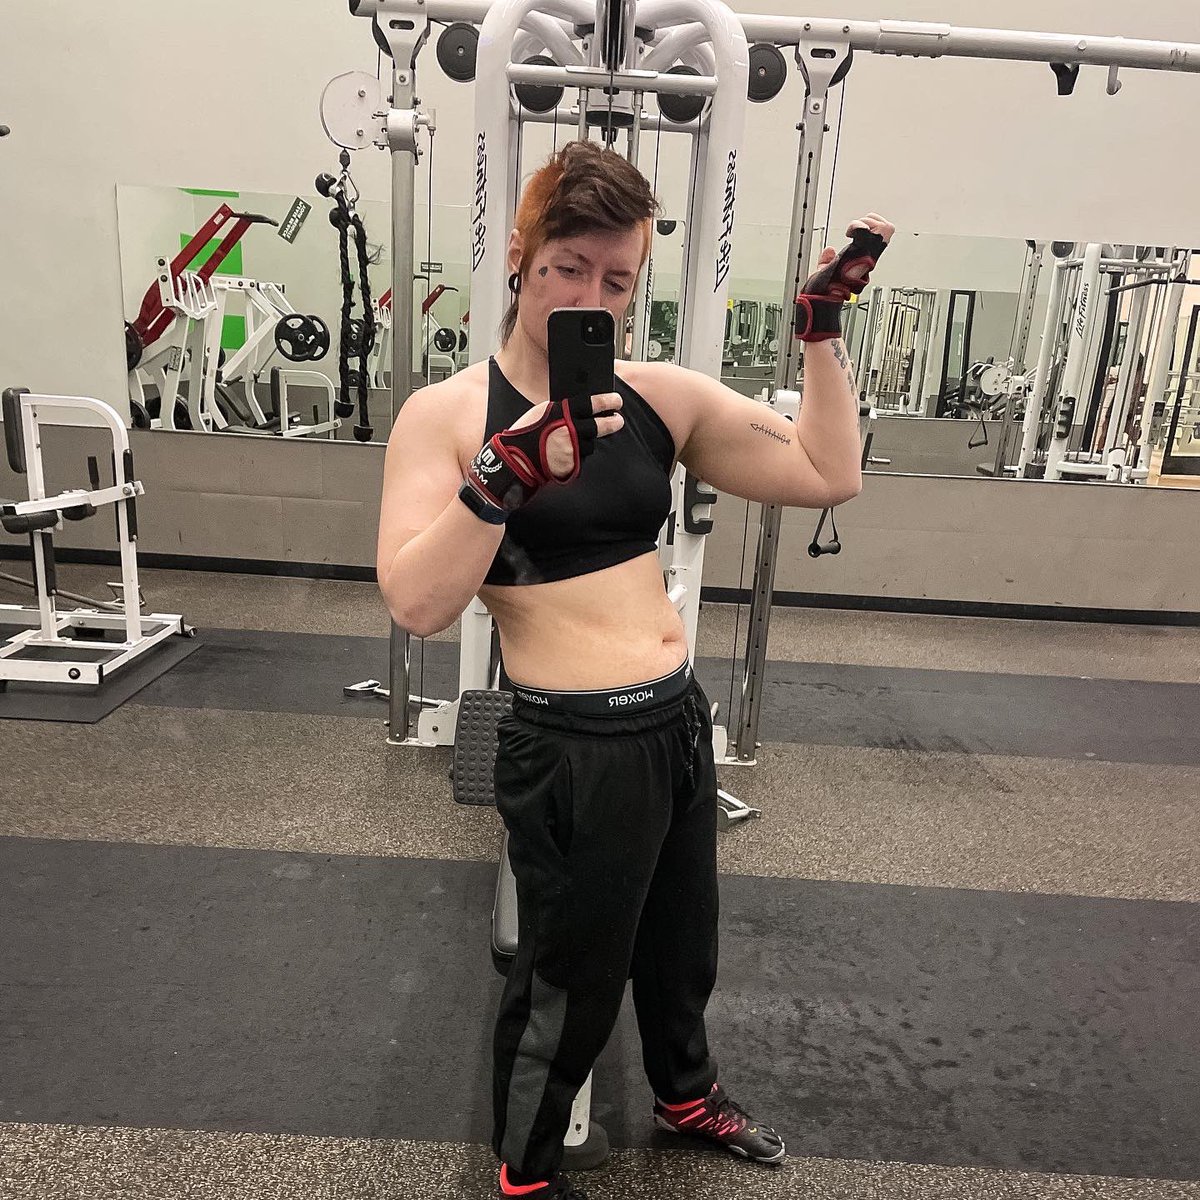 Hi 

*Do not follow me if you are under 21*
#nsfwtwt #queer #queernsfw #nonbinary #bodybuilder #muscleworship #WorshipWednesday #bicepsworship #bicepday #armday #backday #shoulderday